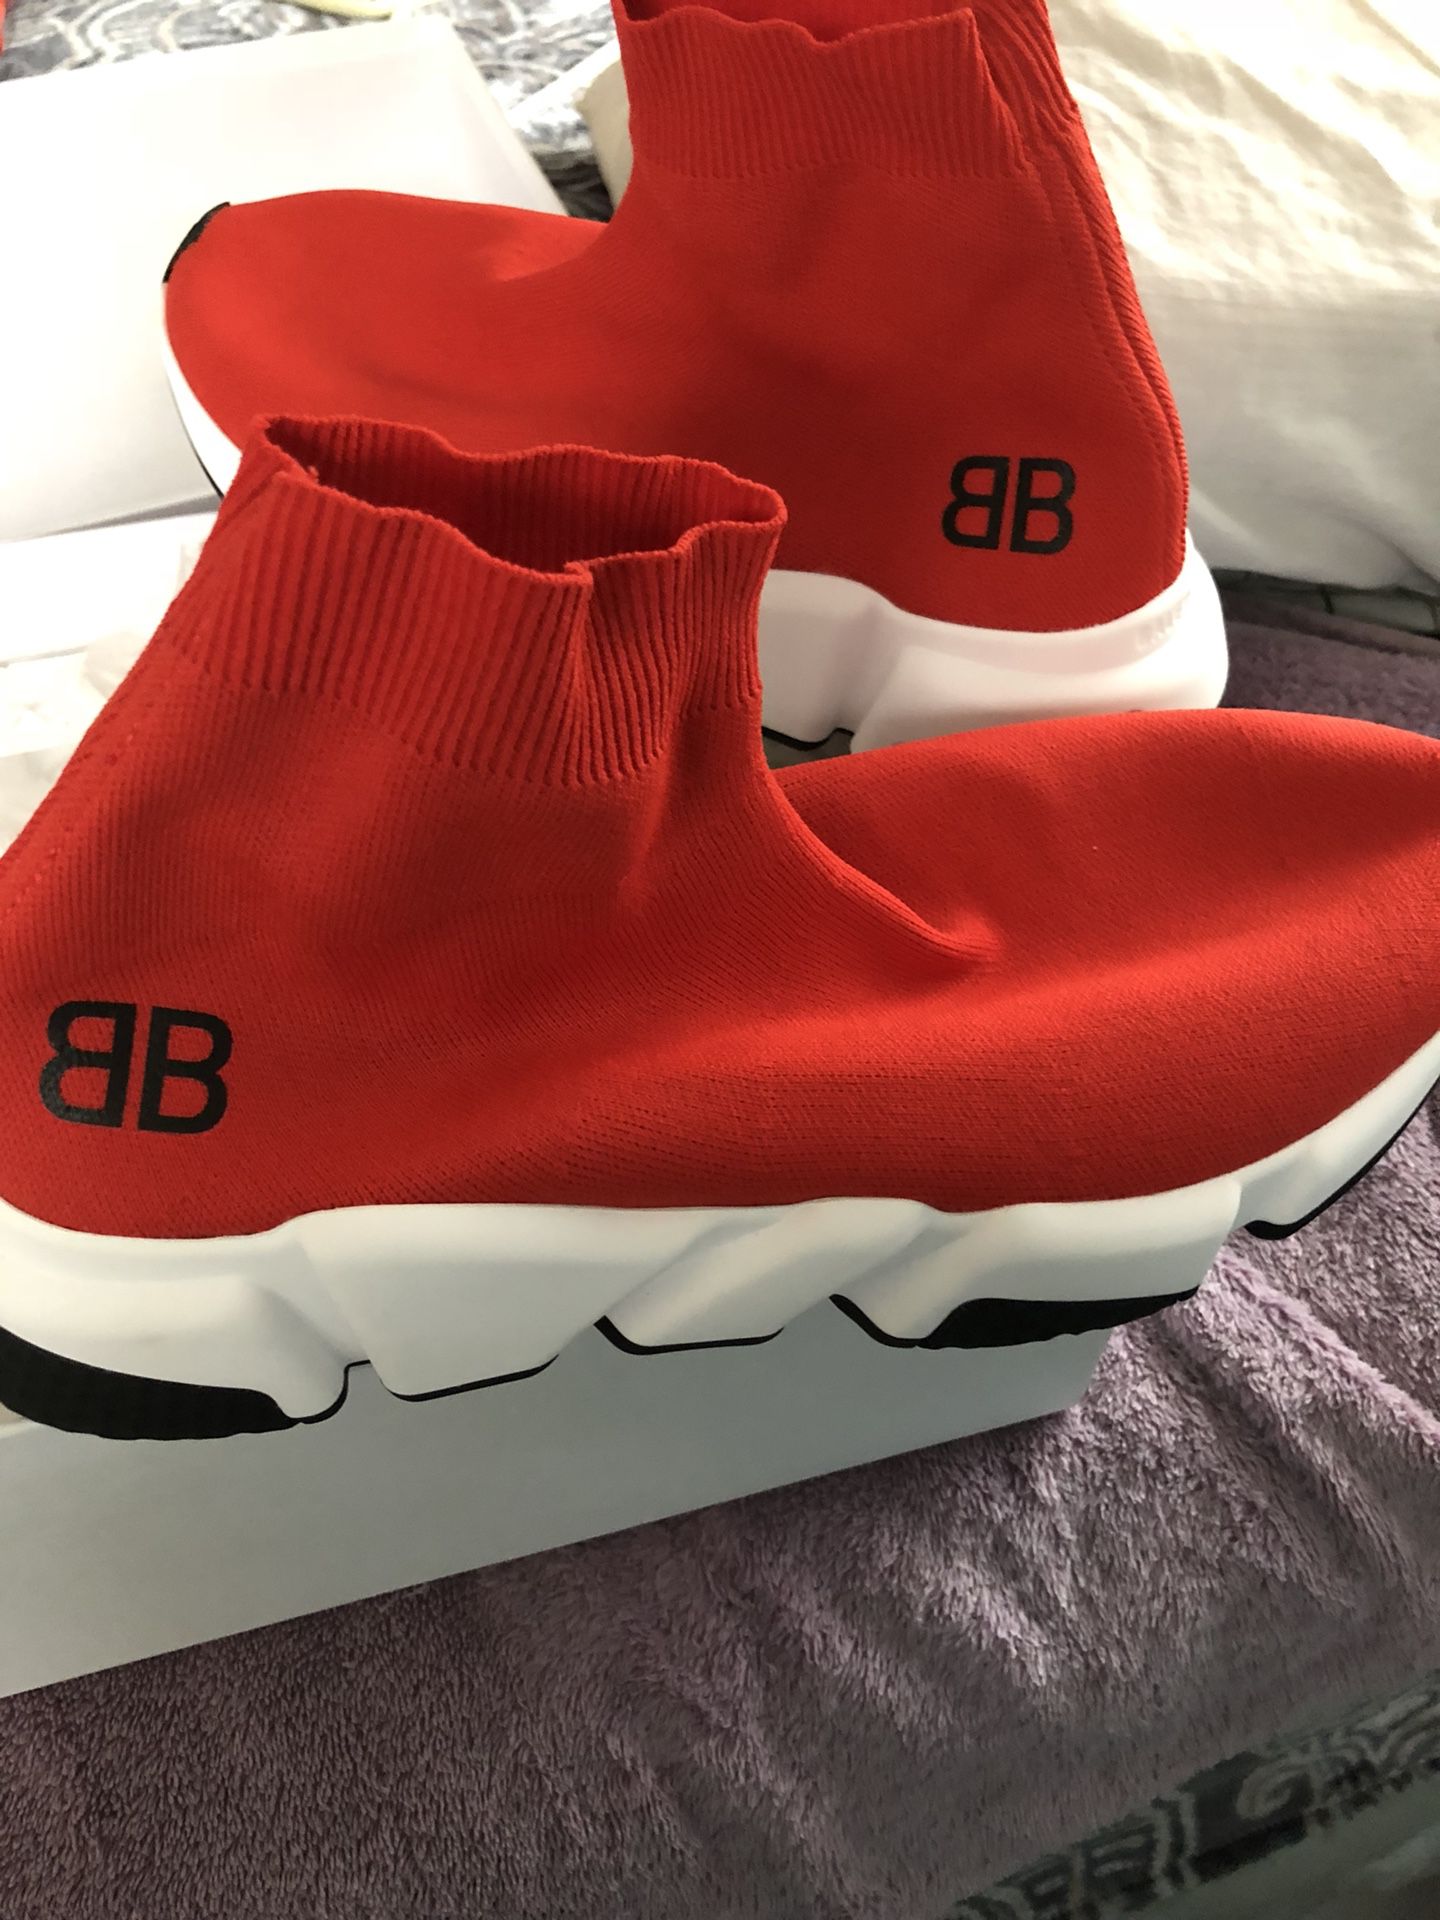 Balenciaga Red Track Runners Size 7 1/2 for Sale in Miami, FL - OfferUp